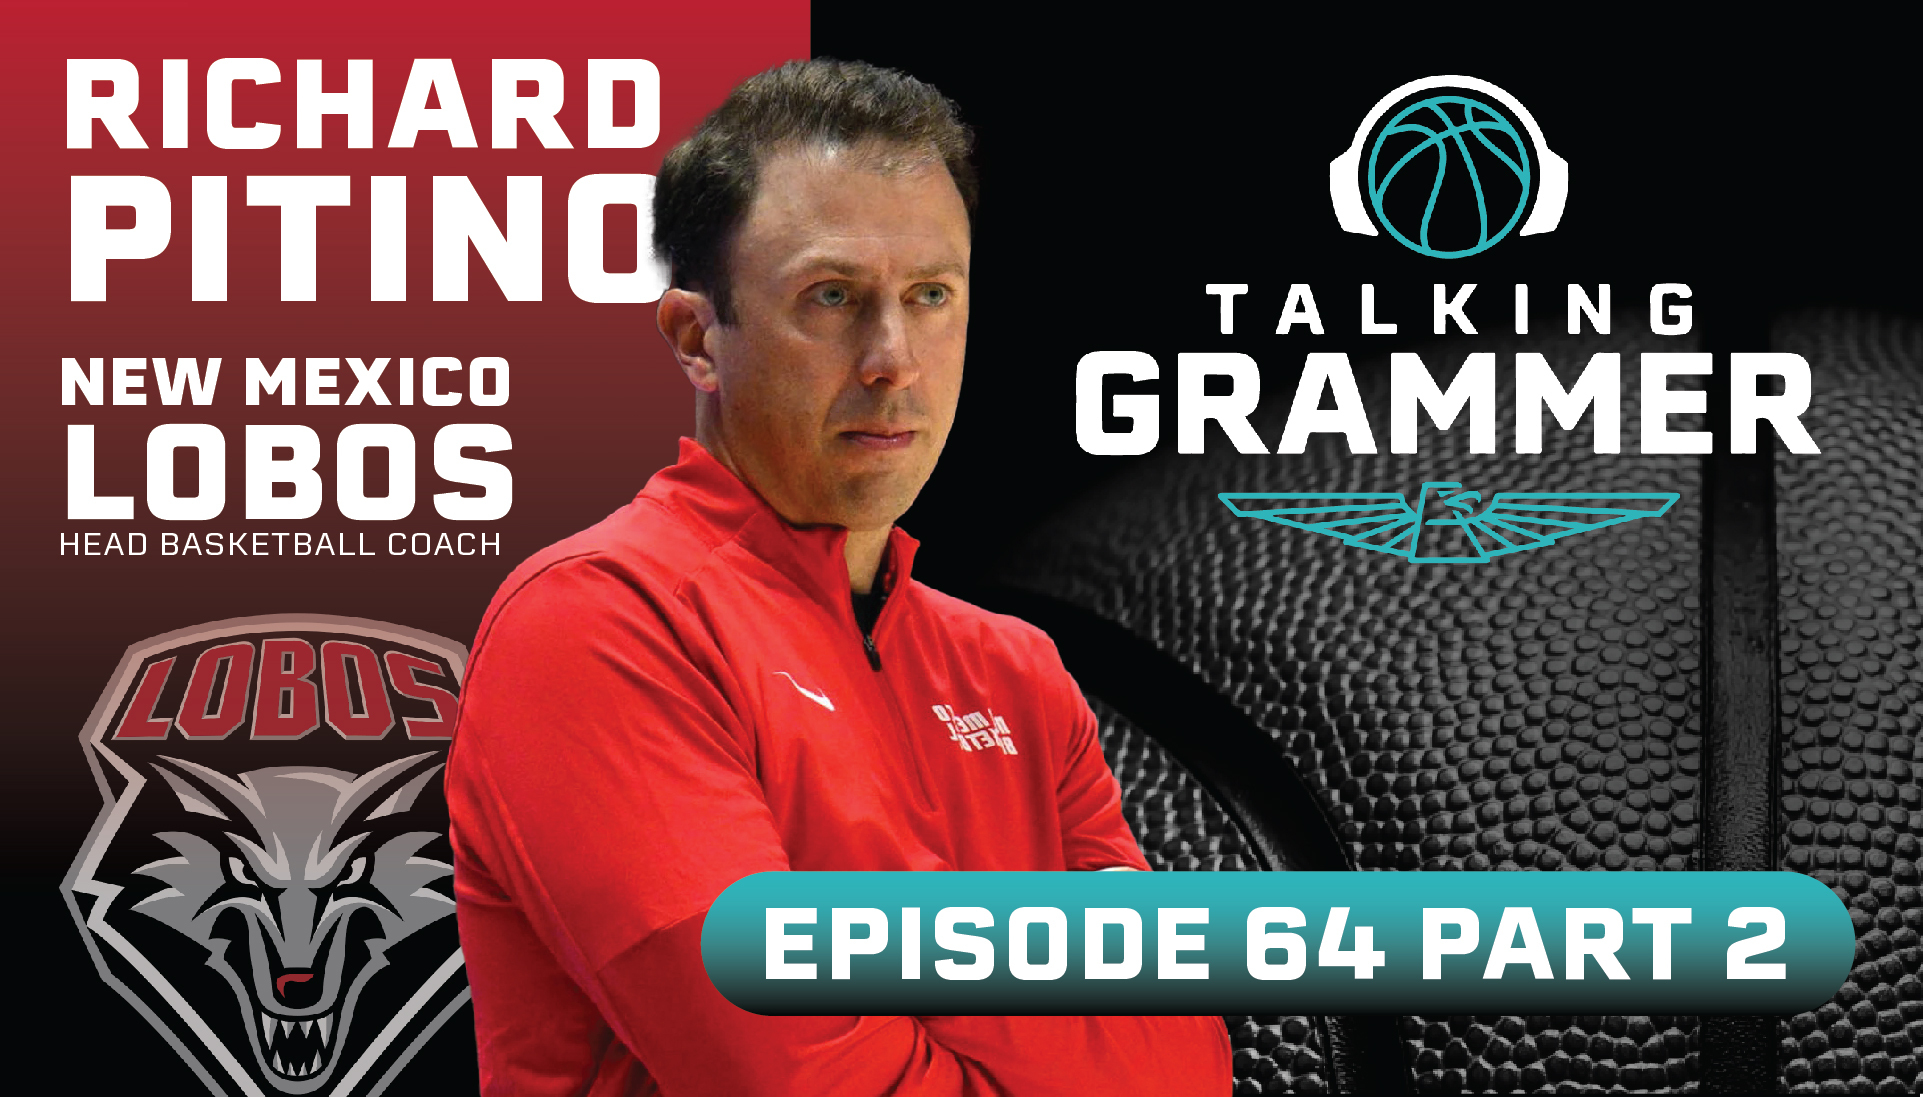 Featured image for “Talking Grammer, Ep. 64: UNM Lobo basketball coach Richard Pitino (Part 2)”